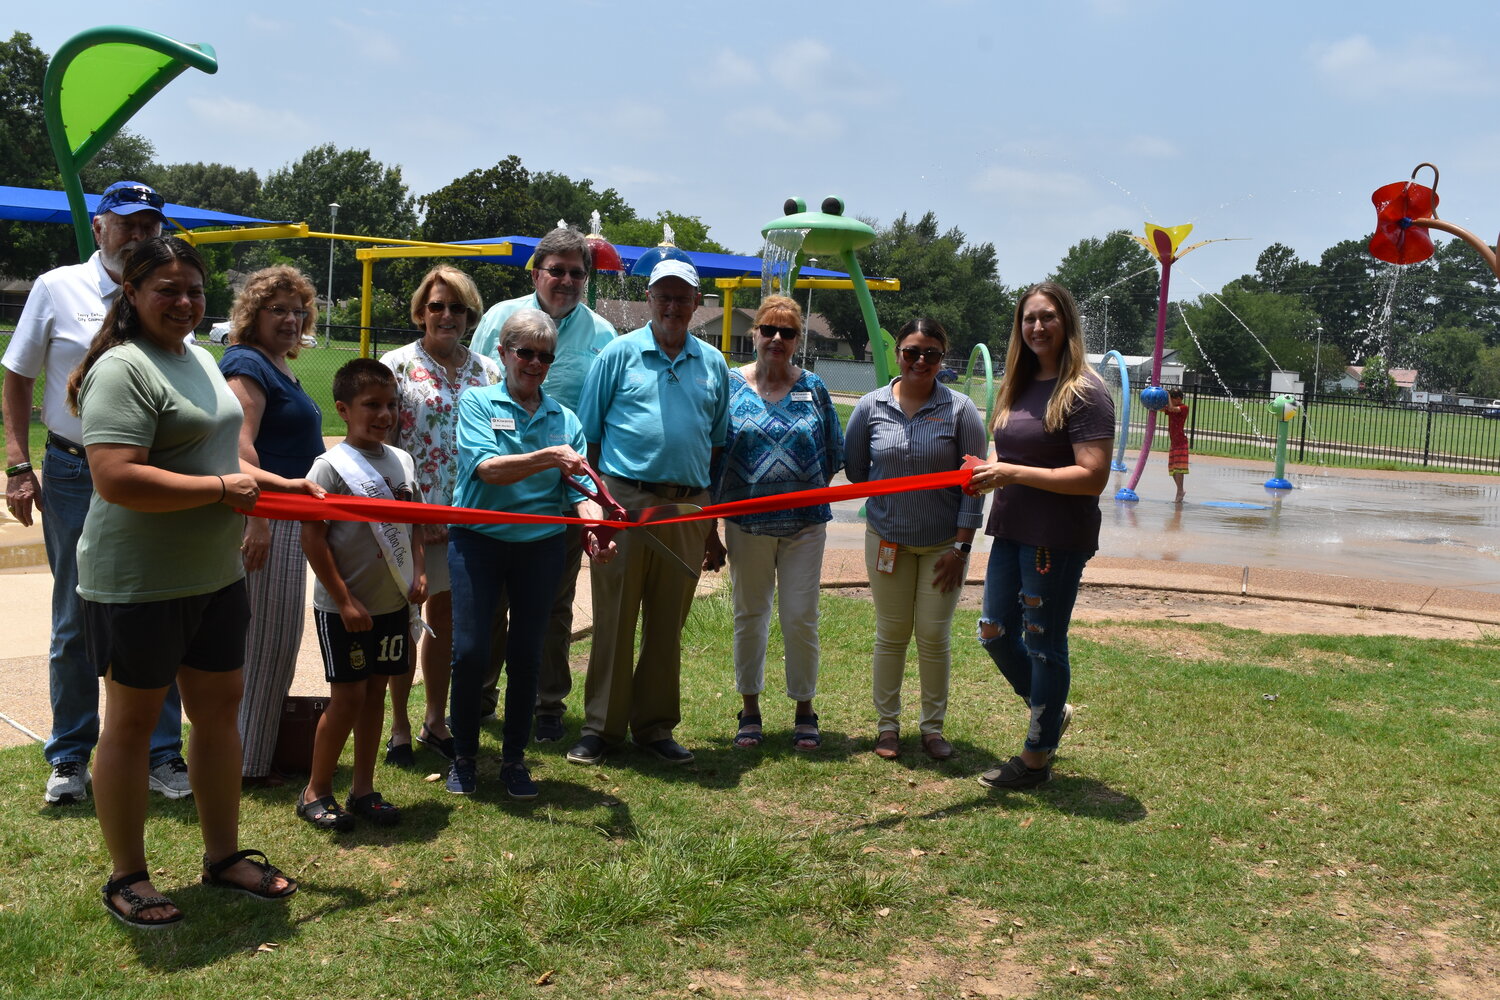 Though it’s been open for awhile, the Mineola Kiwanis Club held the official opening for the splash pad at the Mineola Civic Center Tuesday. The planned event had to be delayed due to weather on Memorial Day weekend. The club recently helped complete the project to add shade sails to the splash pad, so that parents and others would have a shady place to sit near the pad. The club also passed out free popsicles at the event.